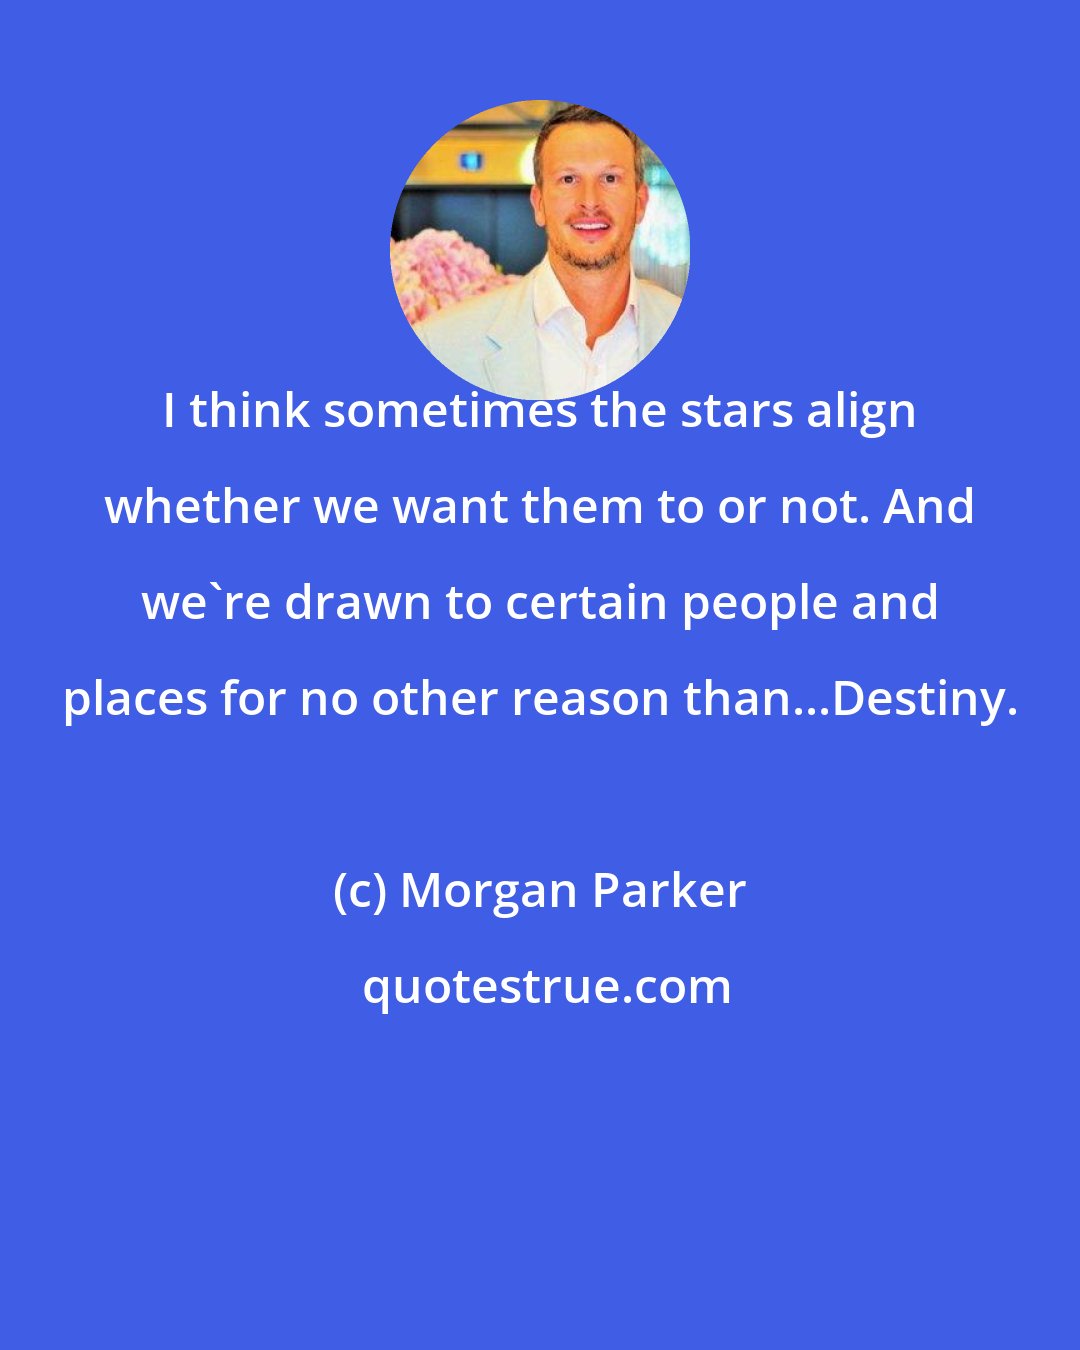 Morgan Parker: I think sometimes the stars align whether we want them to or not. And we're drawn to certain people and places for no other reason than...Destiny.